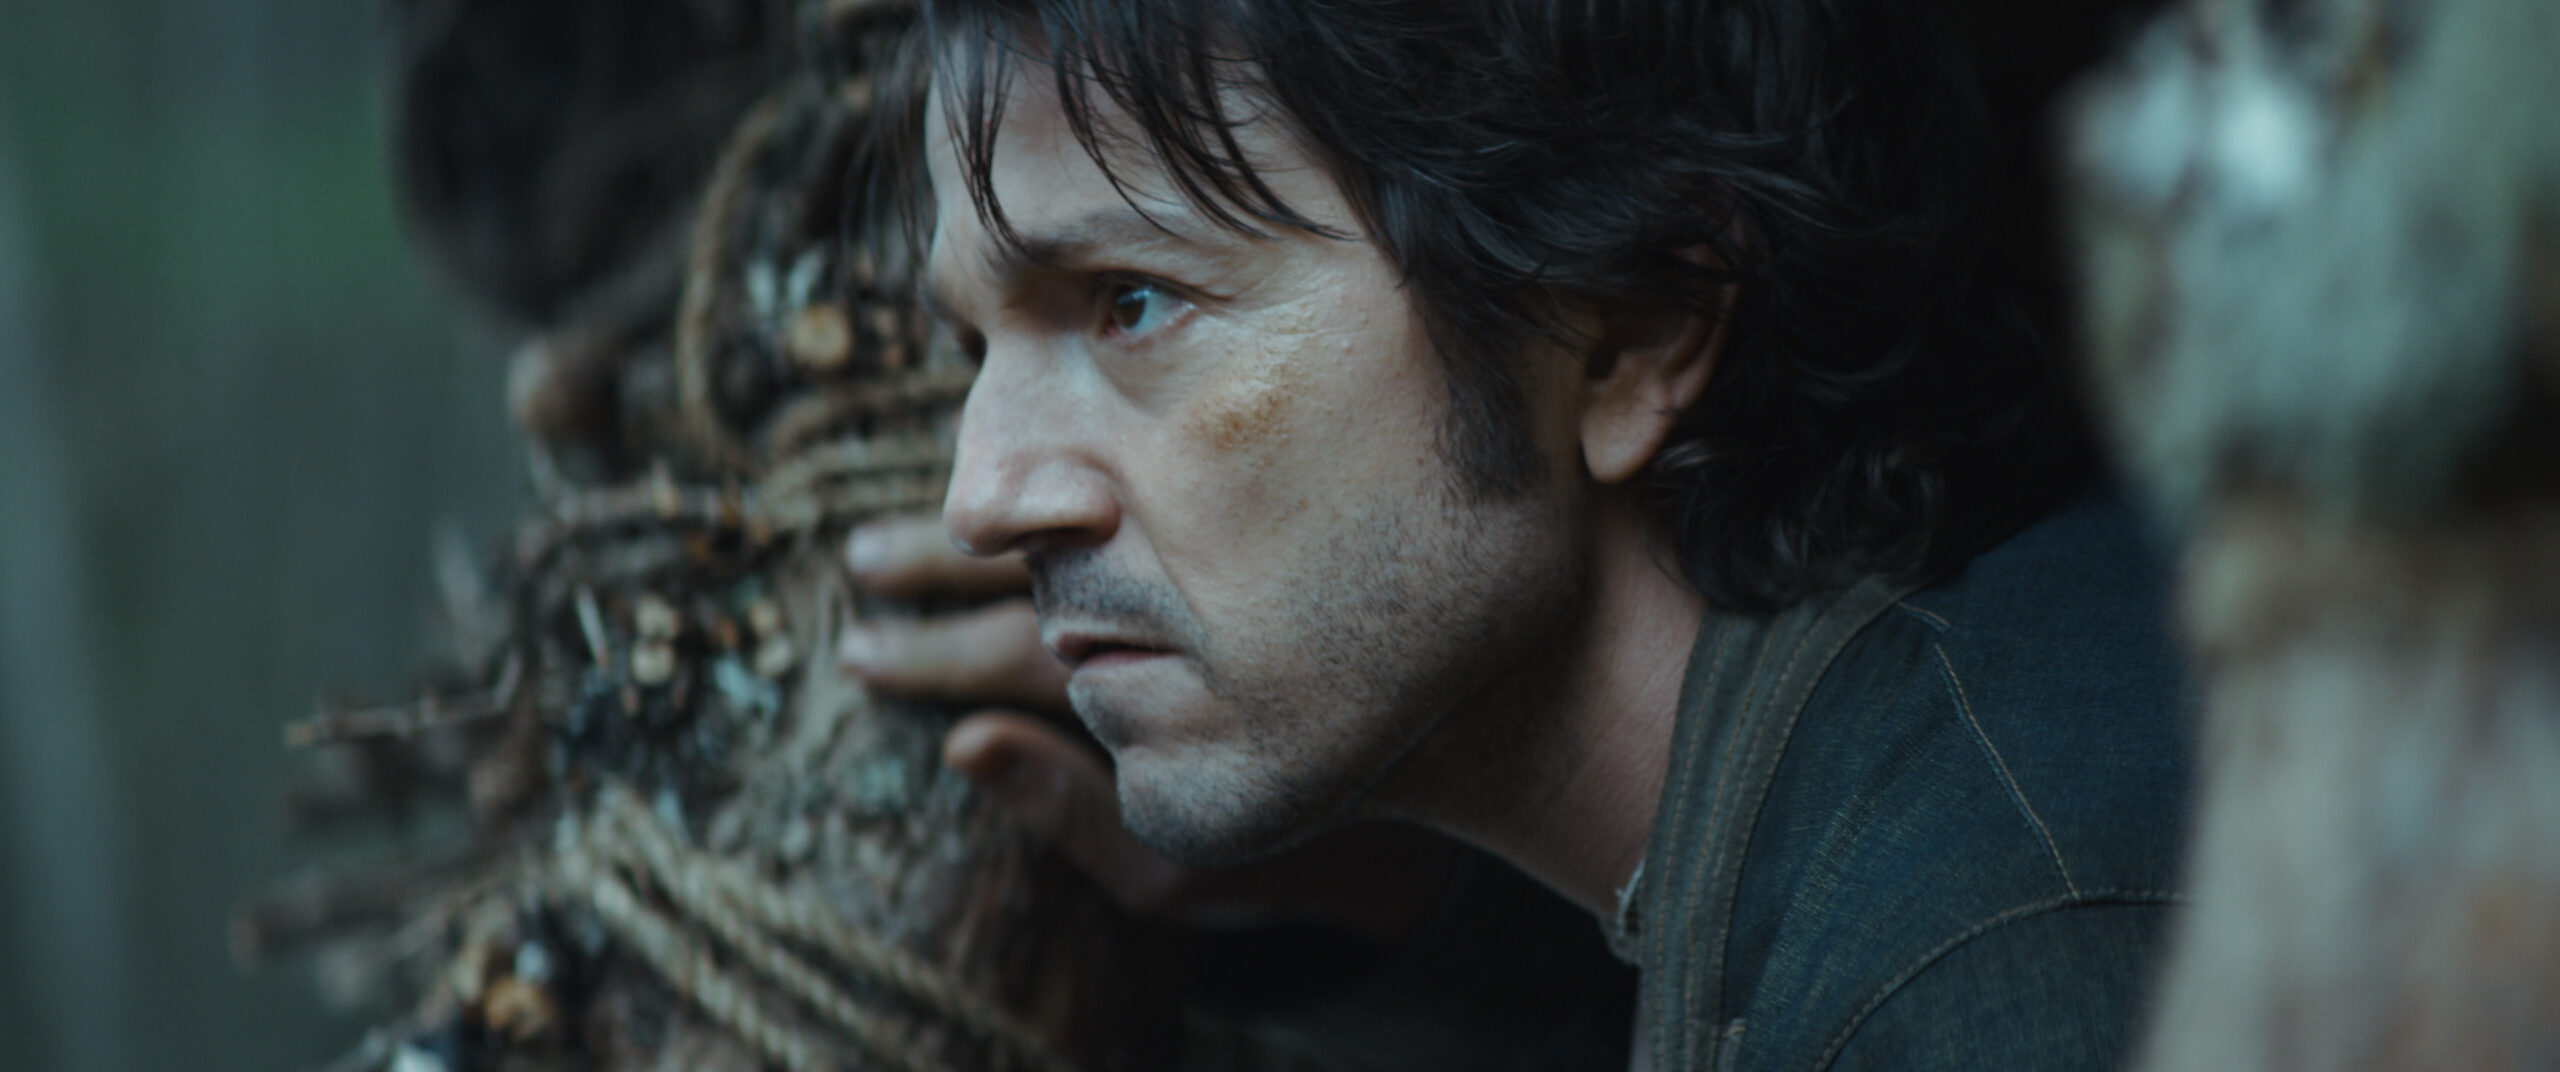 Cassian Andor (Diego Luna) in Lucasfilm's ANDOR, exclusively on Disney+. ©2022 Lucasfilm Ltd. & TM. All Rights Reserved.